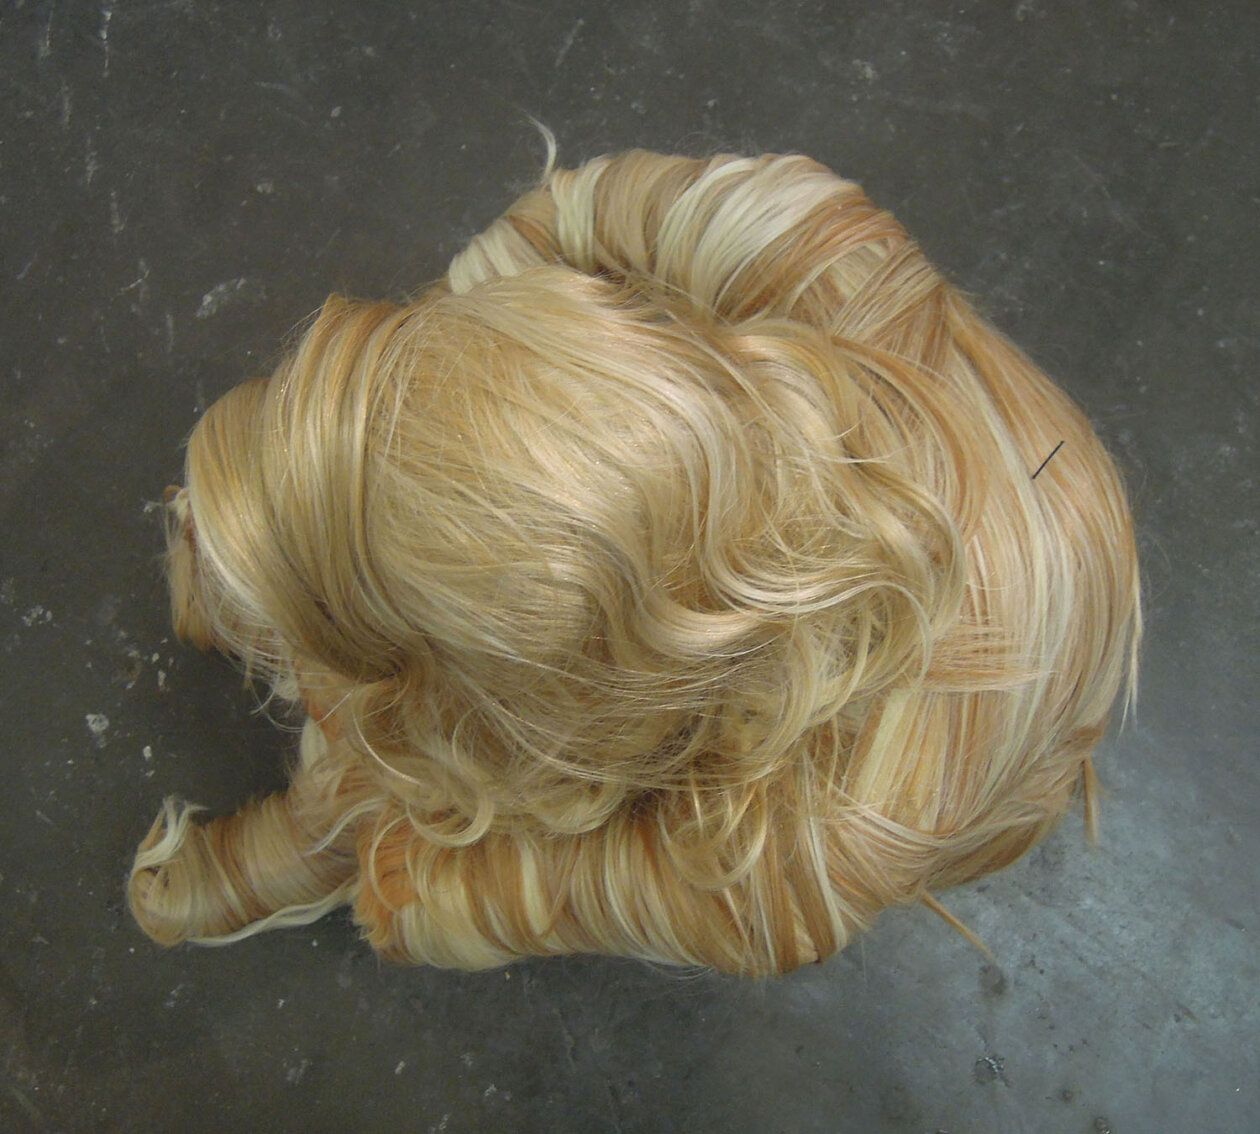 Hair People, Surreal And Poetic Figurative Sculptures By Lauren Carly Shaw (9)